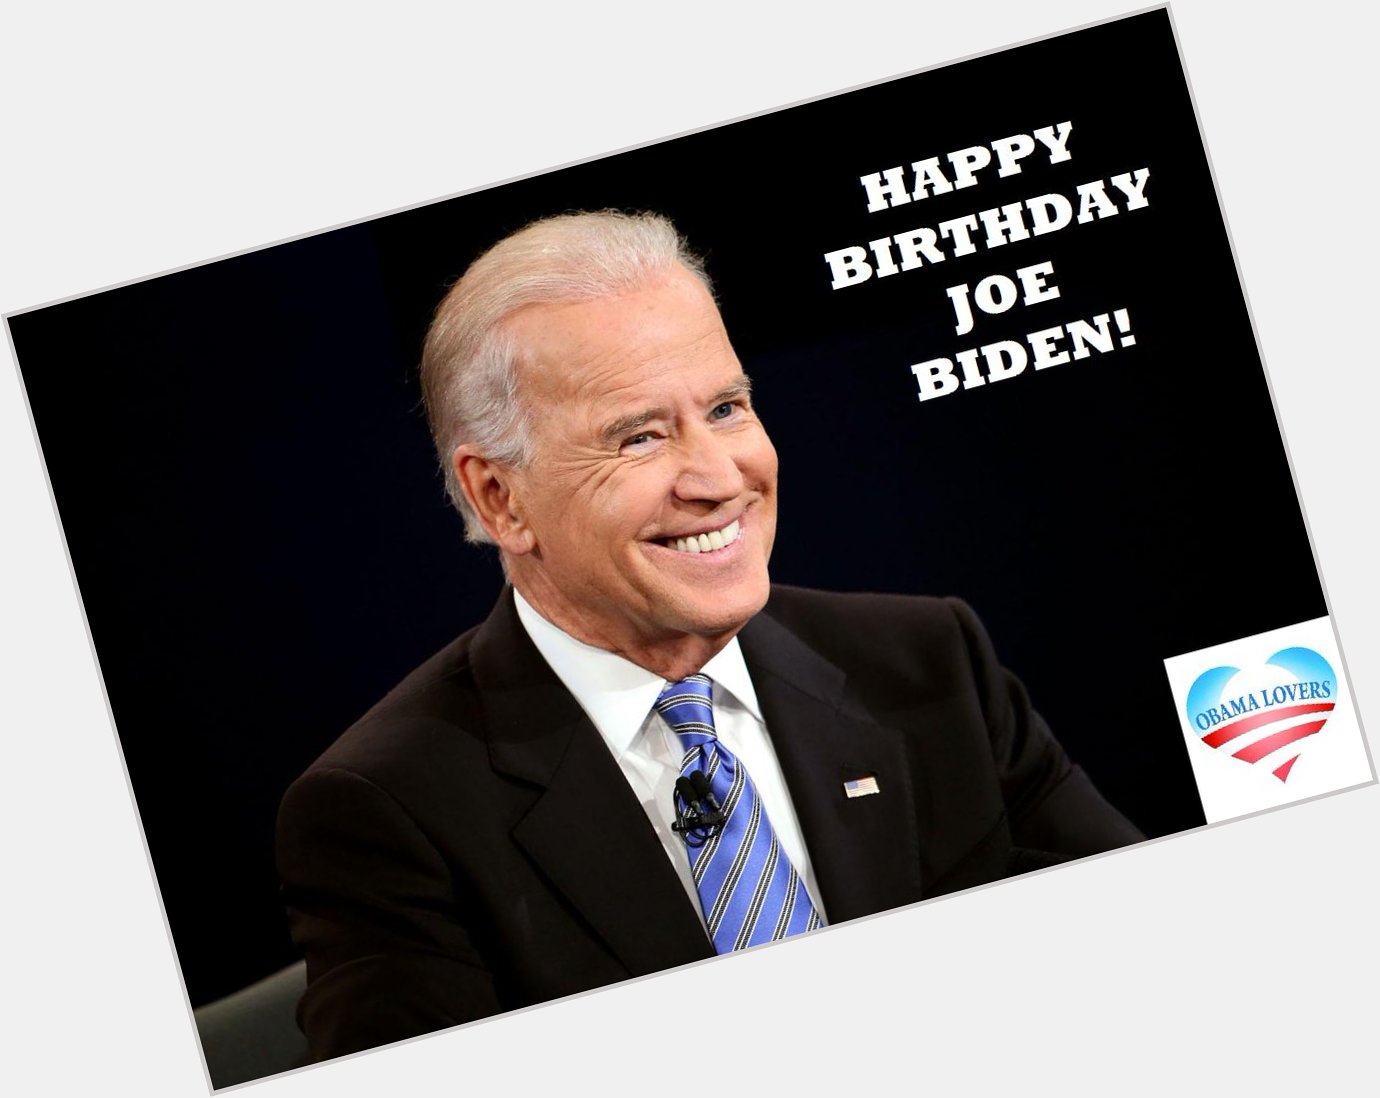 Happy Birthday Joe Biden! Thanks for making streets & homes safer for women & protecting womens civil rights. 